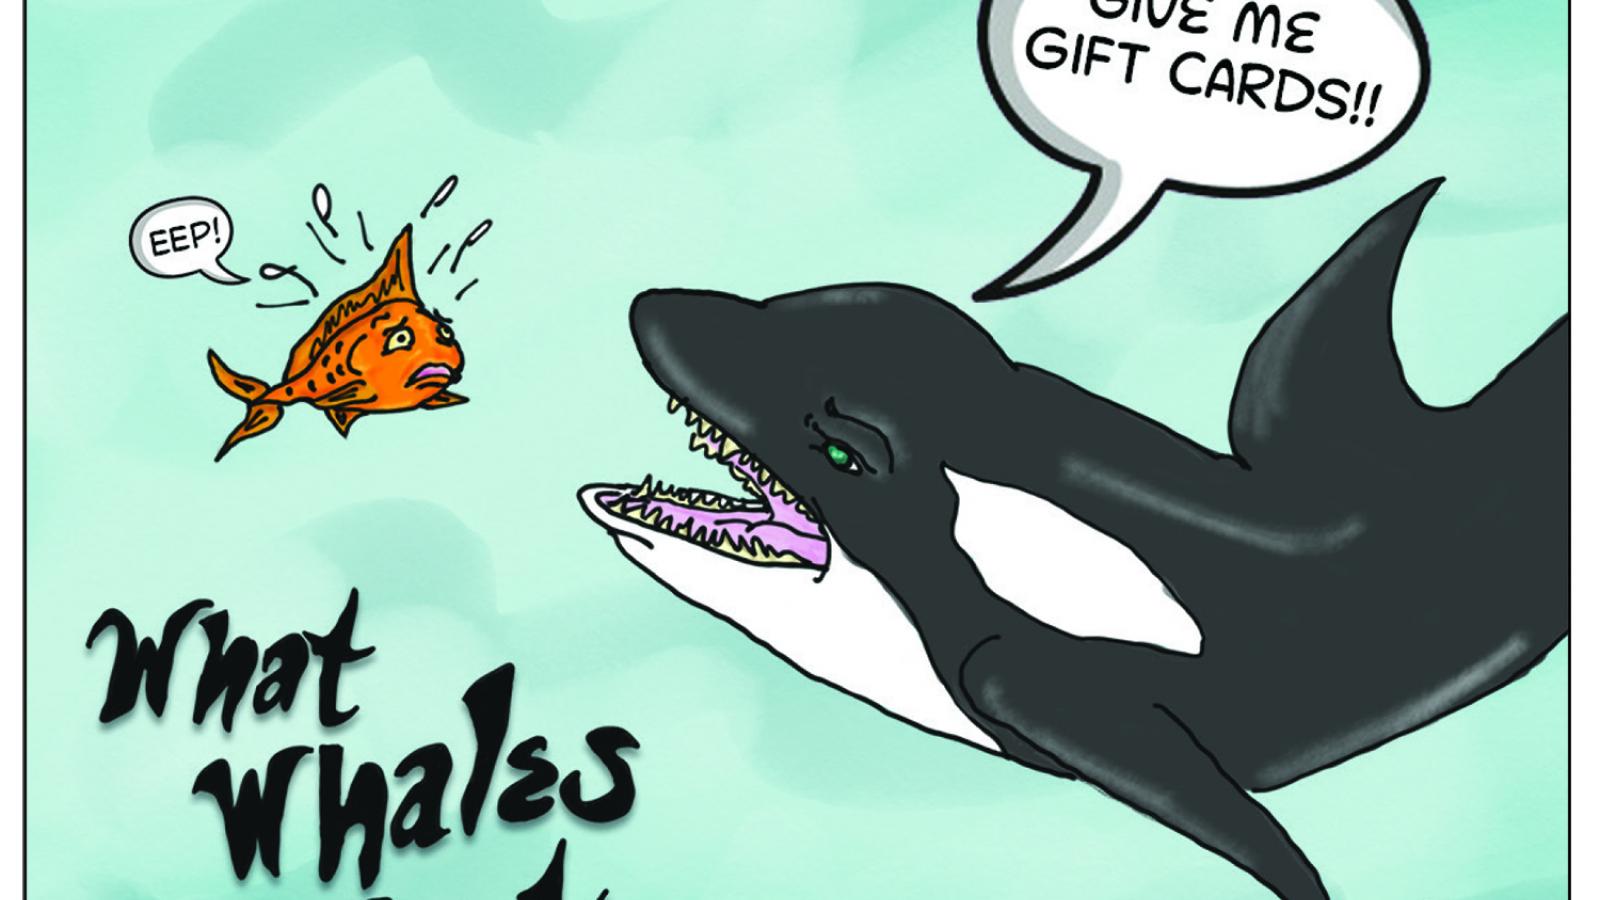 What Whales Want - Gift Cards!